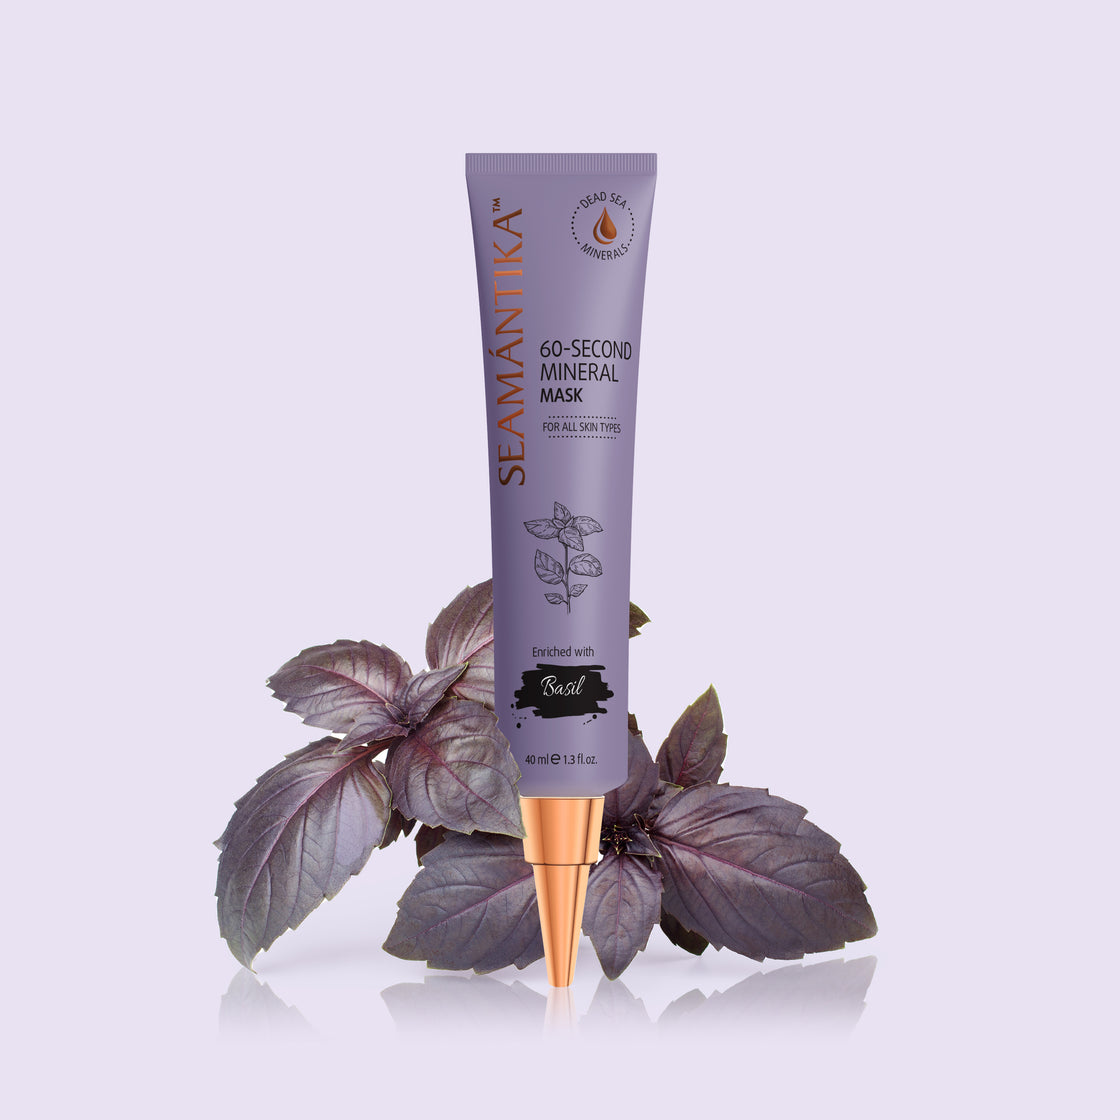 60-SECOND MINERAL MASK - BASIL LEAF EXTRACT